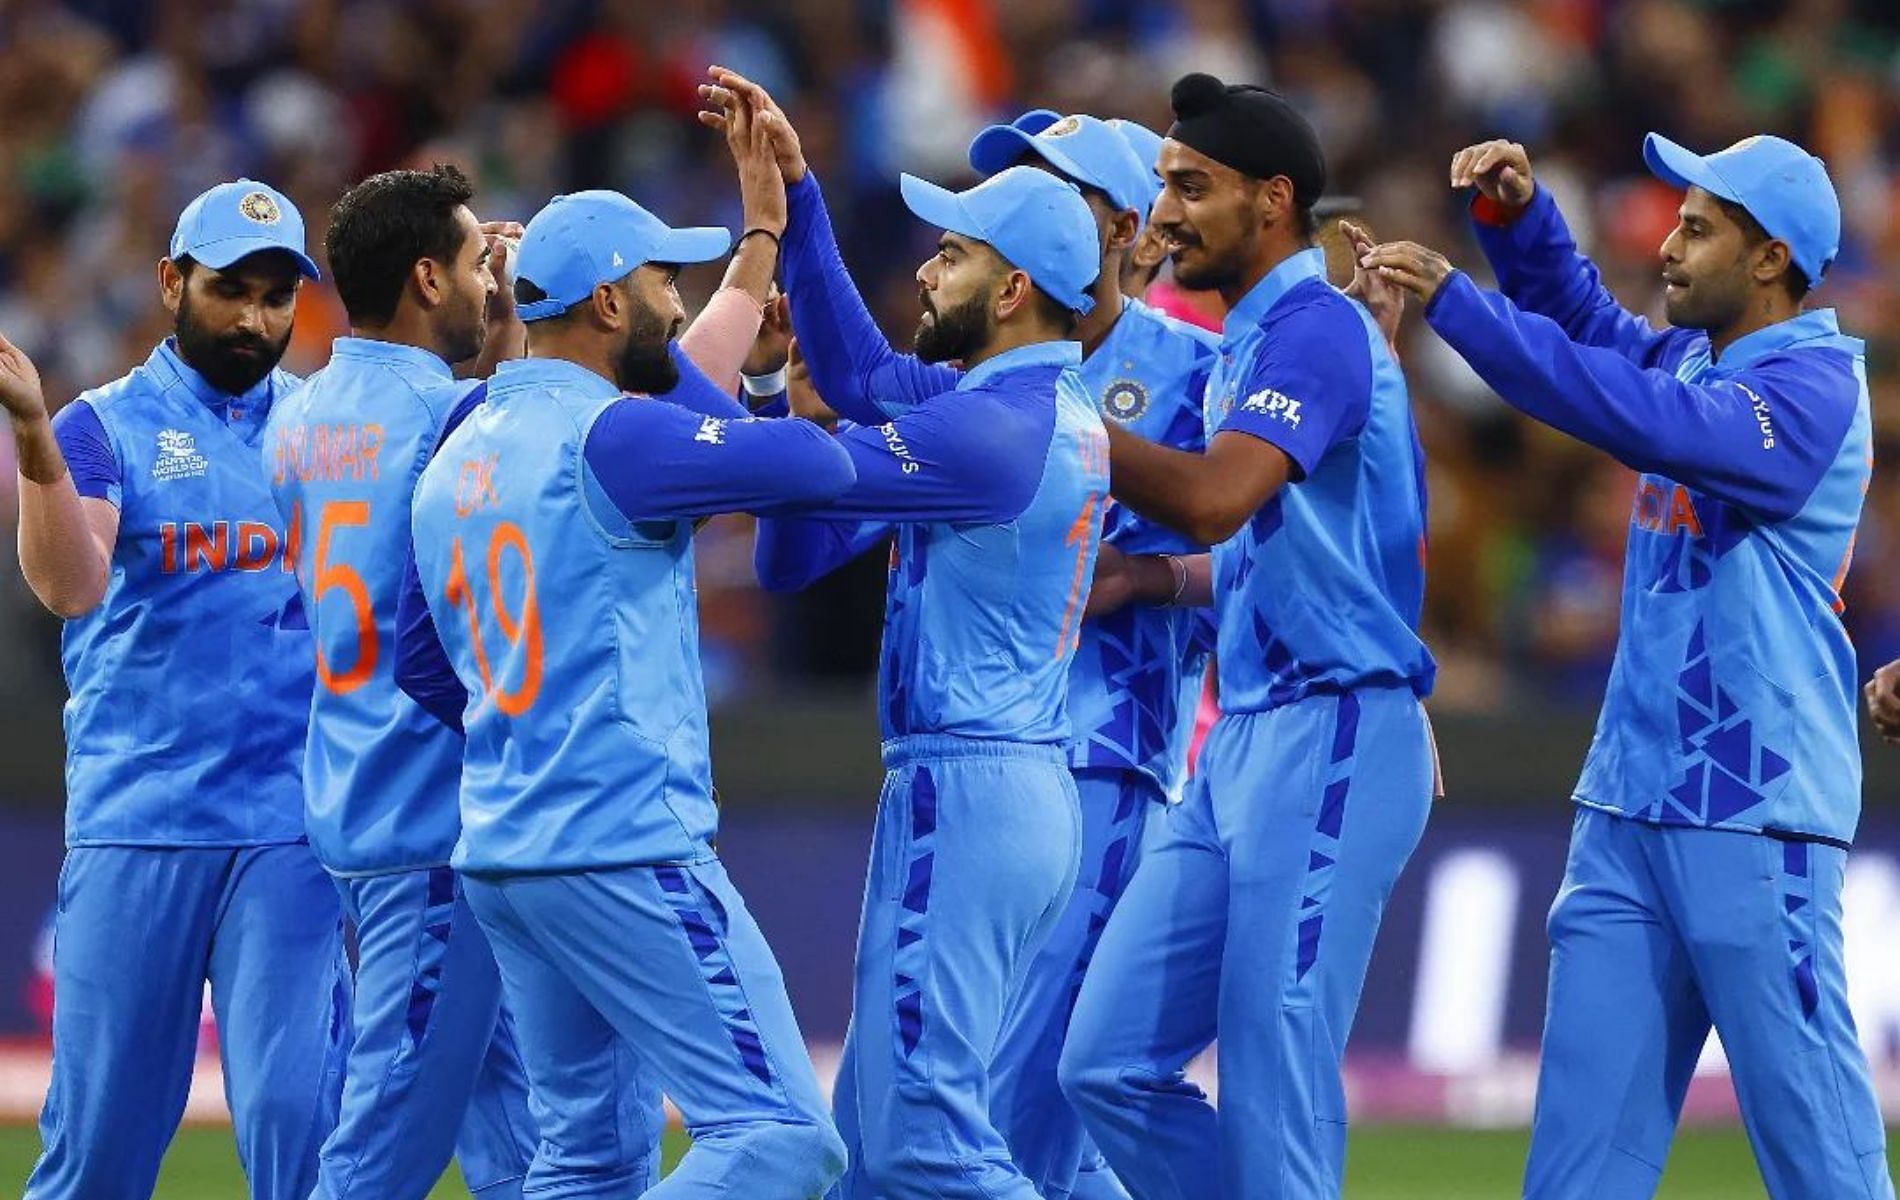 T20 World Cup 2022: “Don’t feel India will let this high come down” - Harbhajan Singh on Men in Blue’s remaining group-stage fixtures